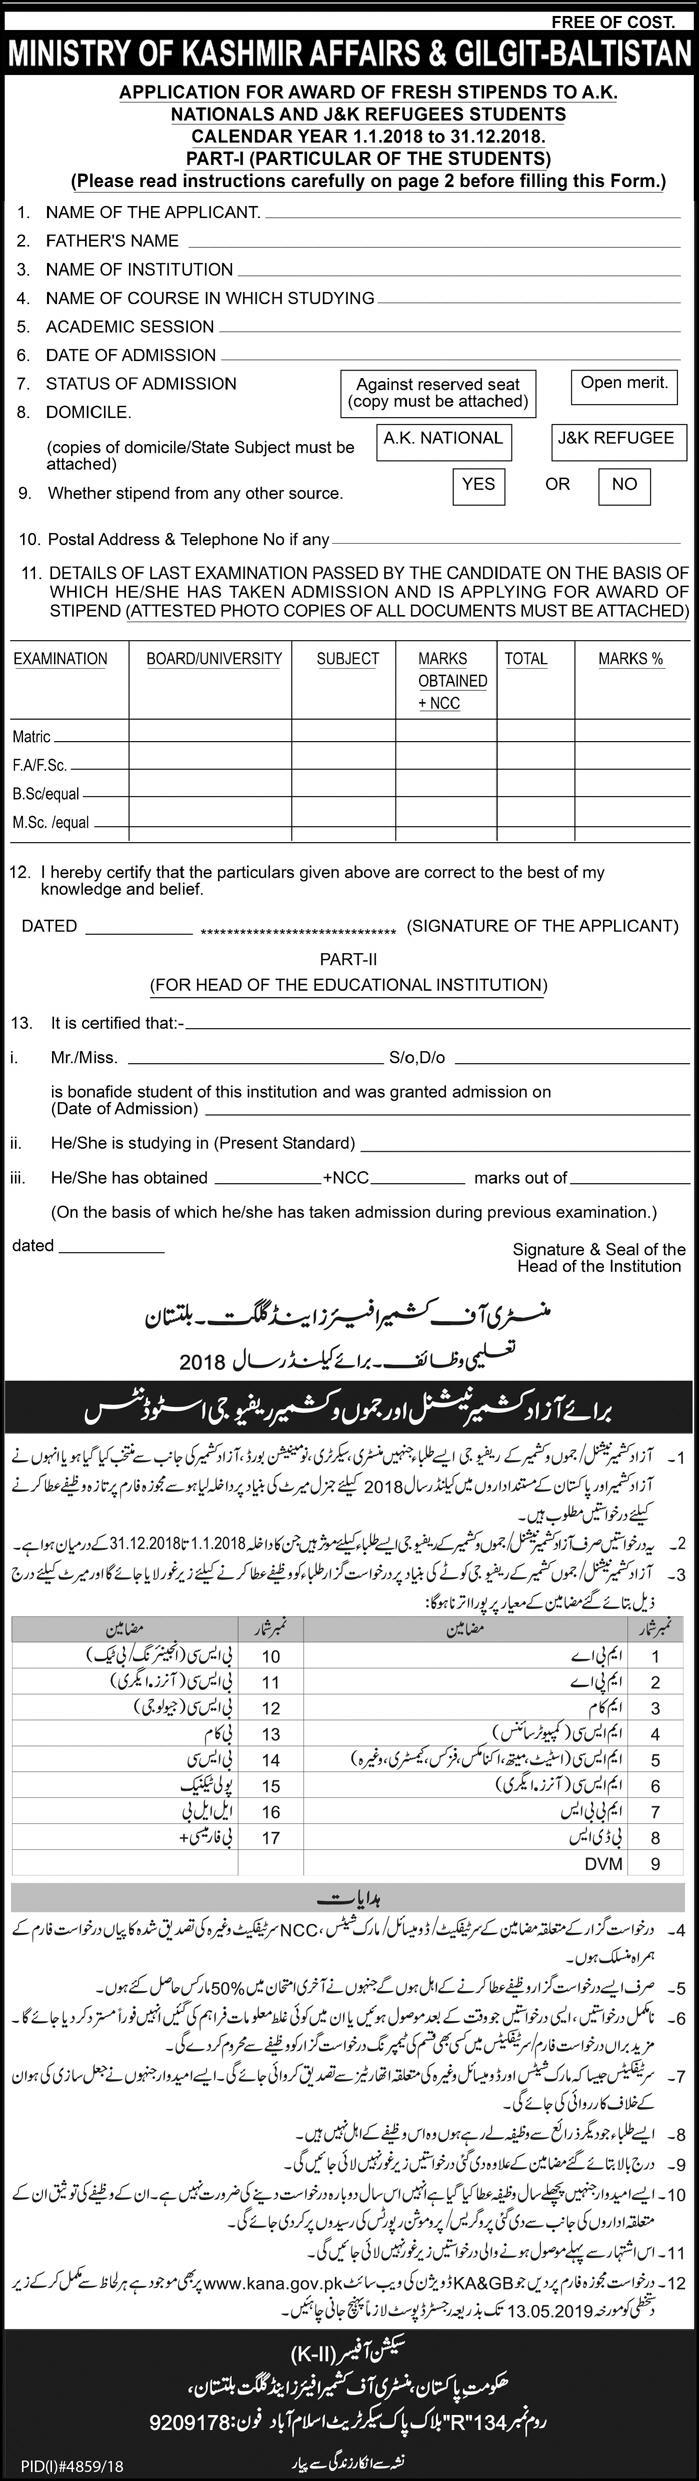 Scholarships 2019 For Students of AJK & GB, Download Form